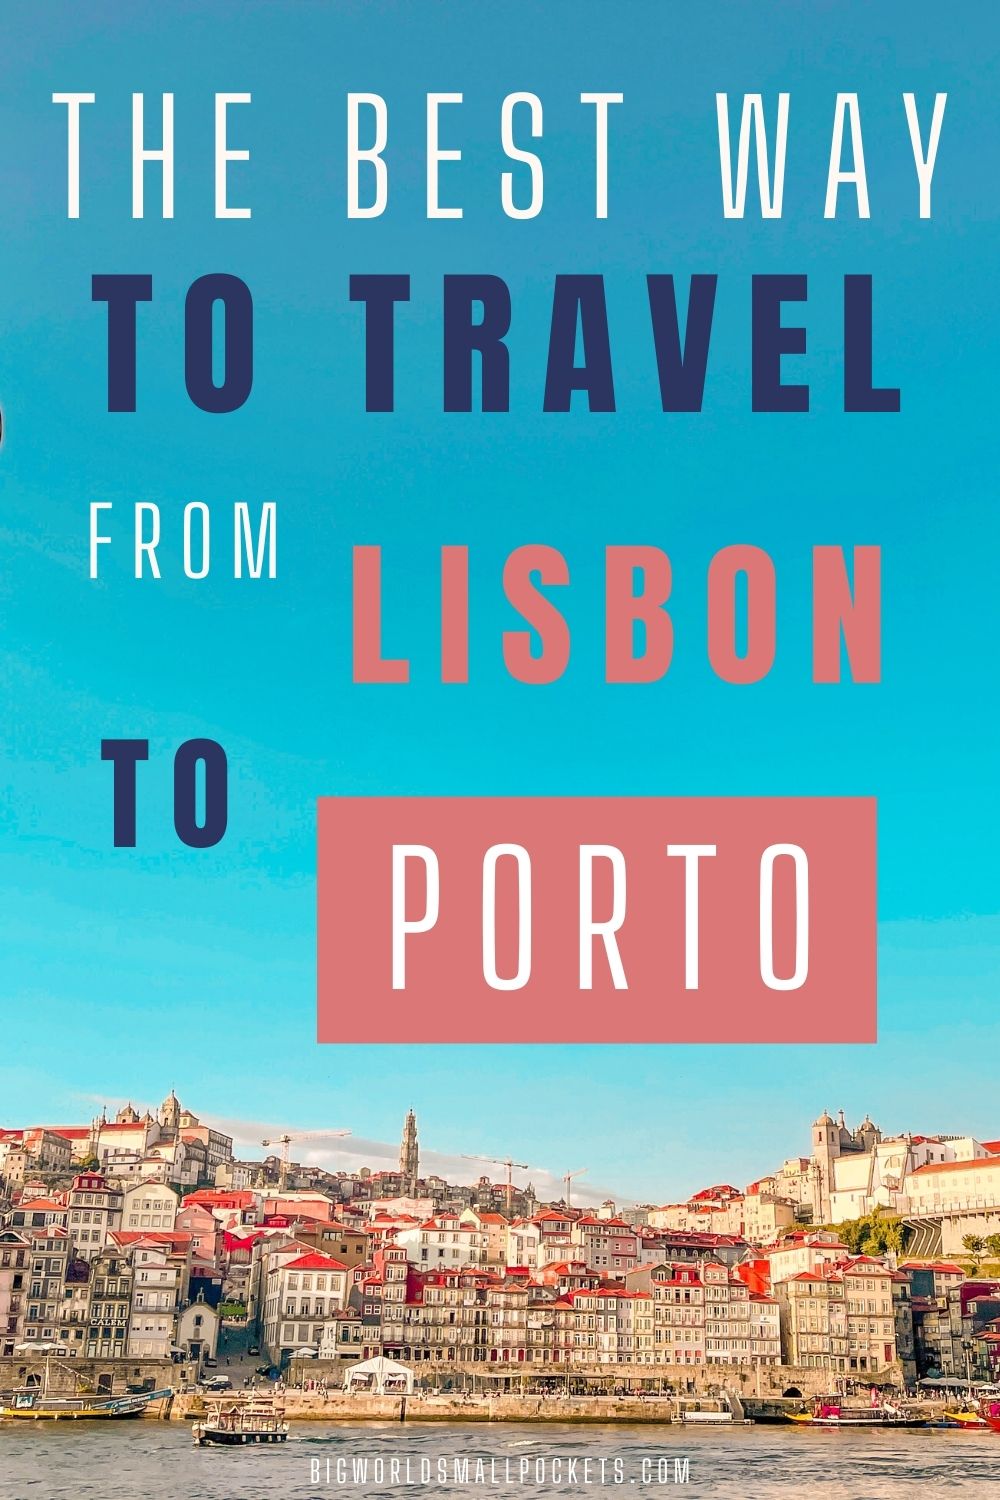 The Best Way to Travel from Lisbon to Porto